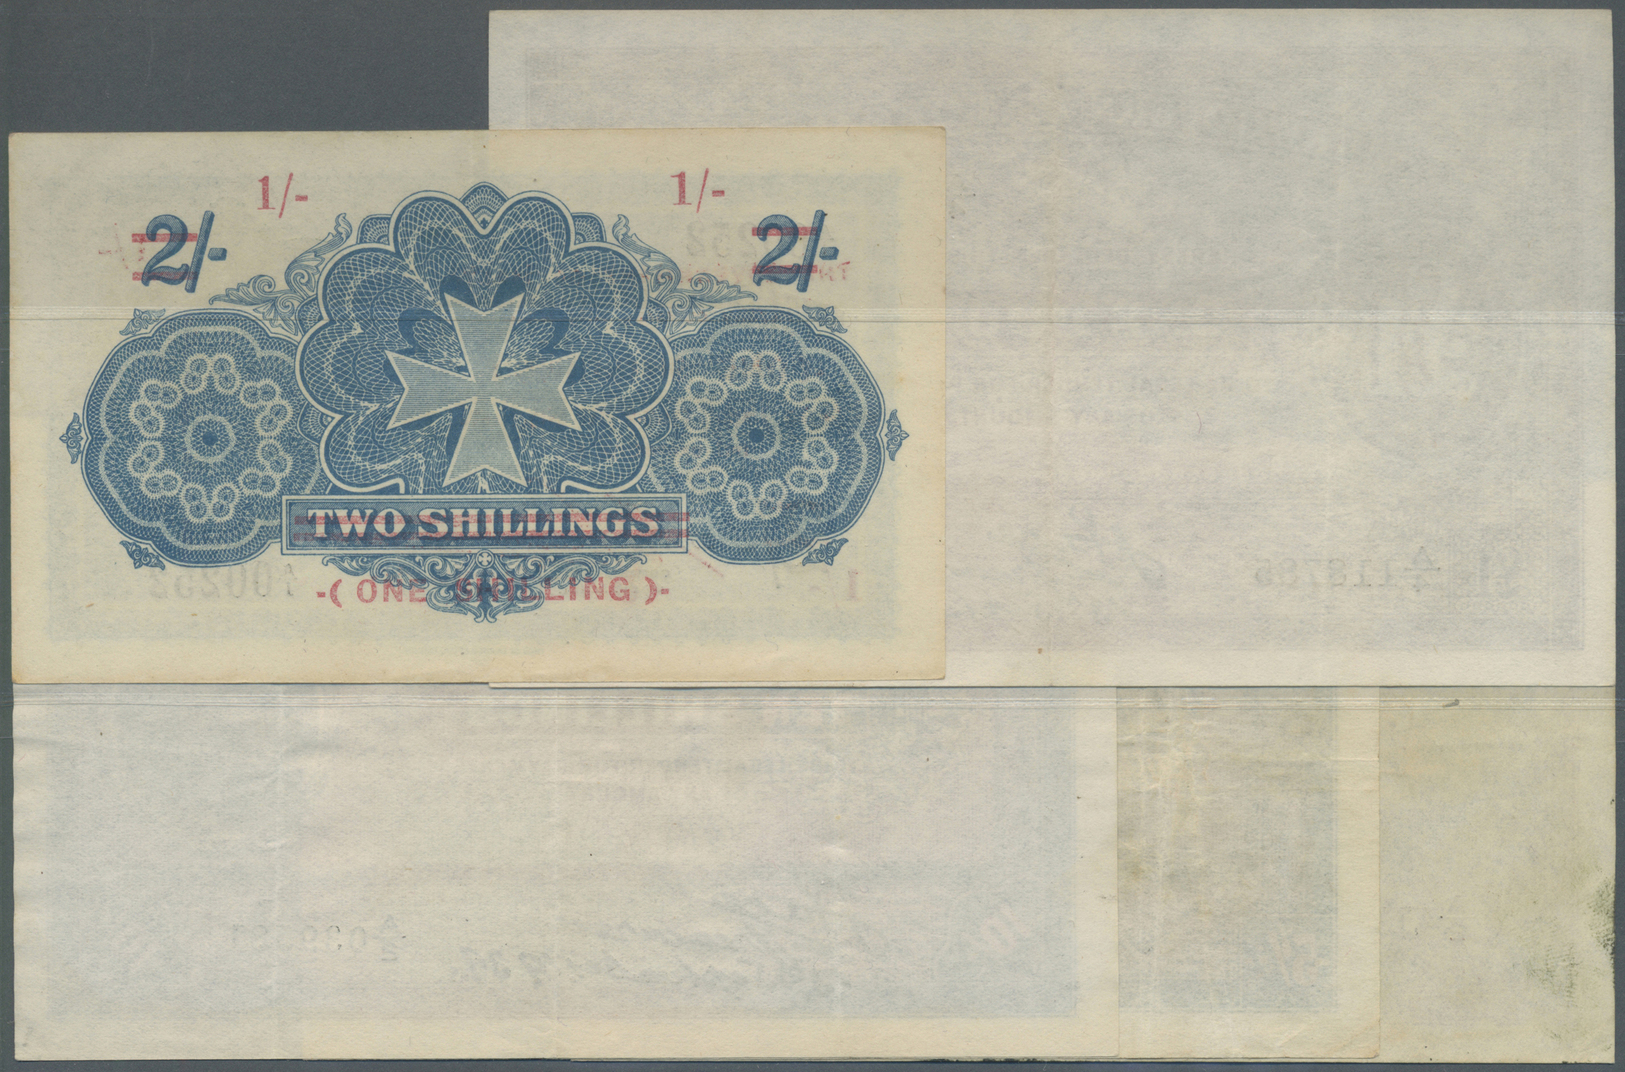 01656 Malta: Small Set With 5 Banknotes 1939 Issue Comprising 2 Shillings 6 Pence, 5 Shillings, 10 Shillings, 1 Pound 19 - Malta